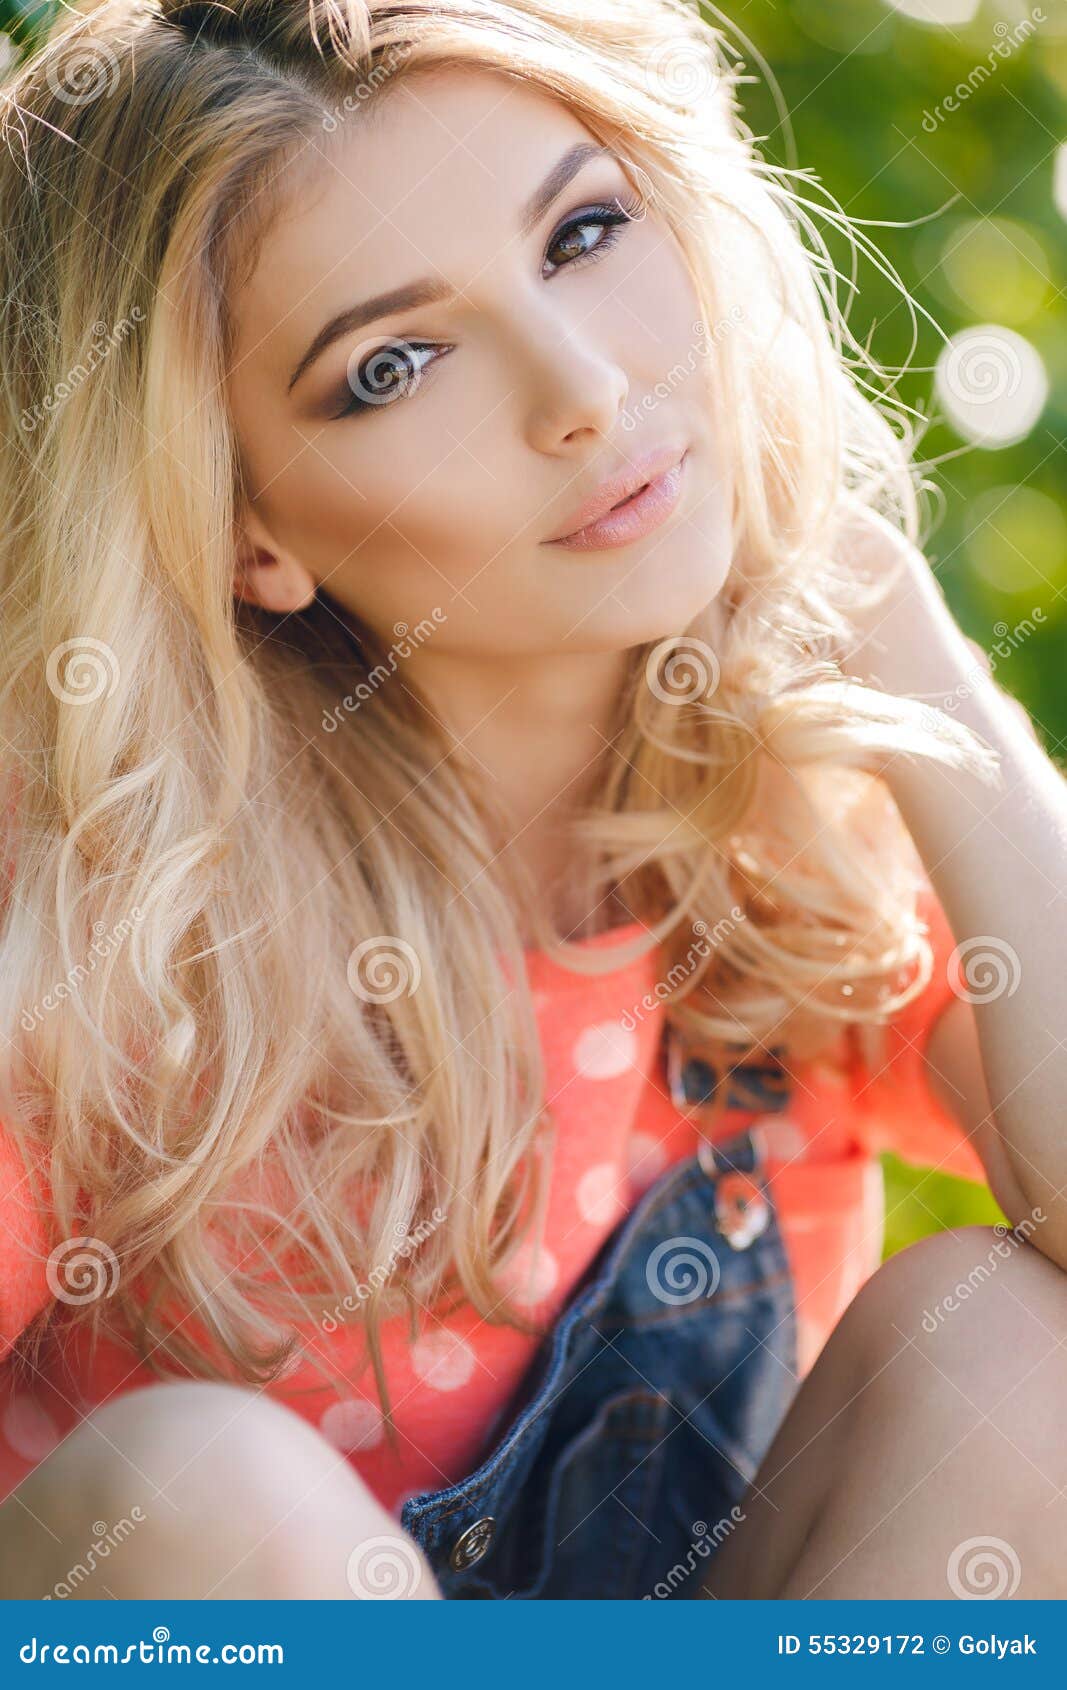 Summer Portrait Of A Beautiful Woman Stock Photo Image Of Brown